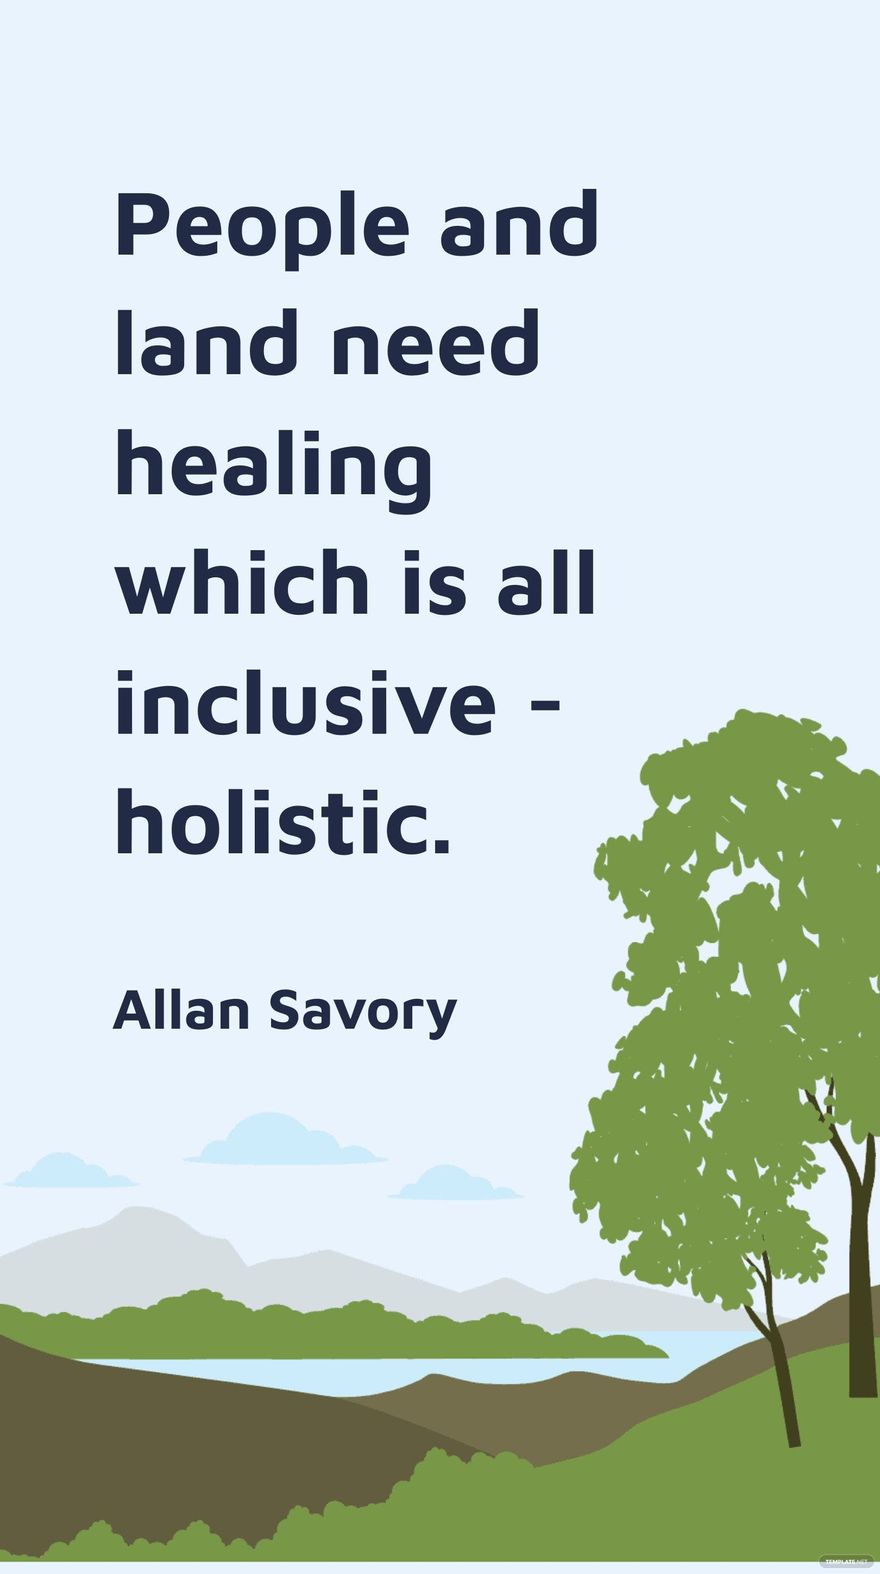 Allan Savory - People and land need healing which is all inclusive - holistic.